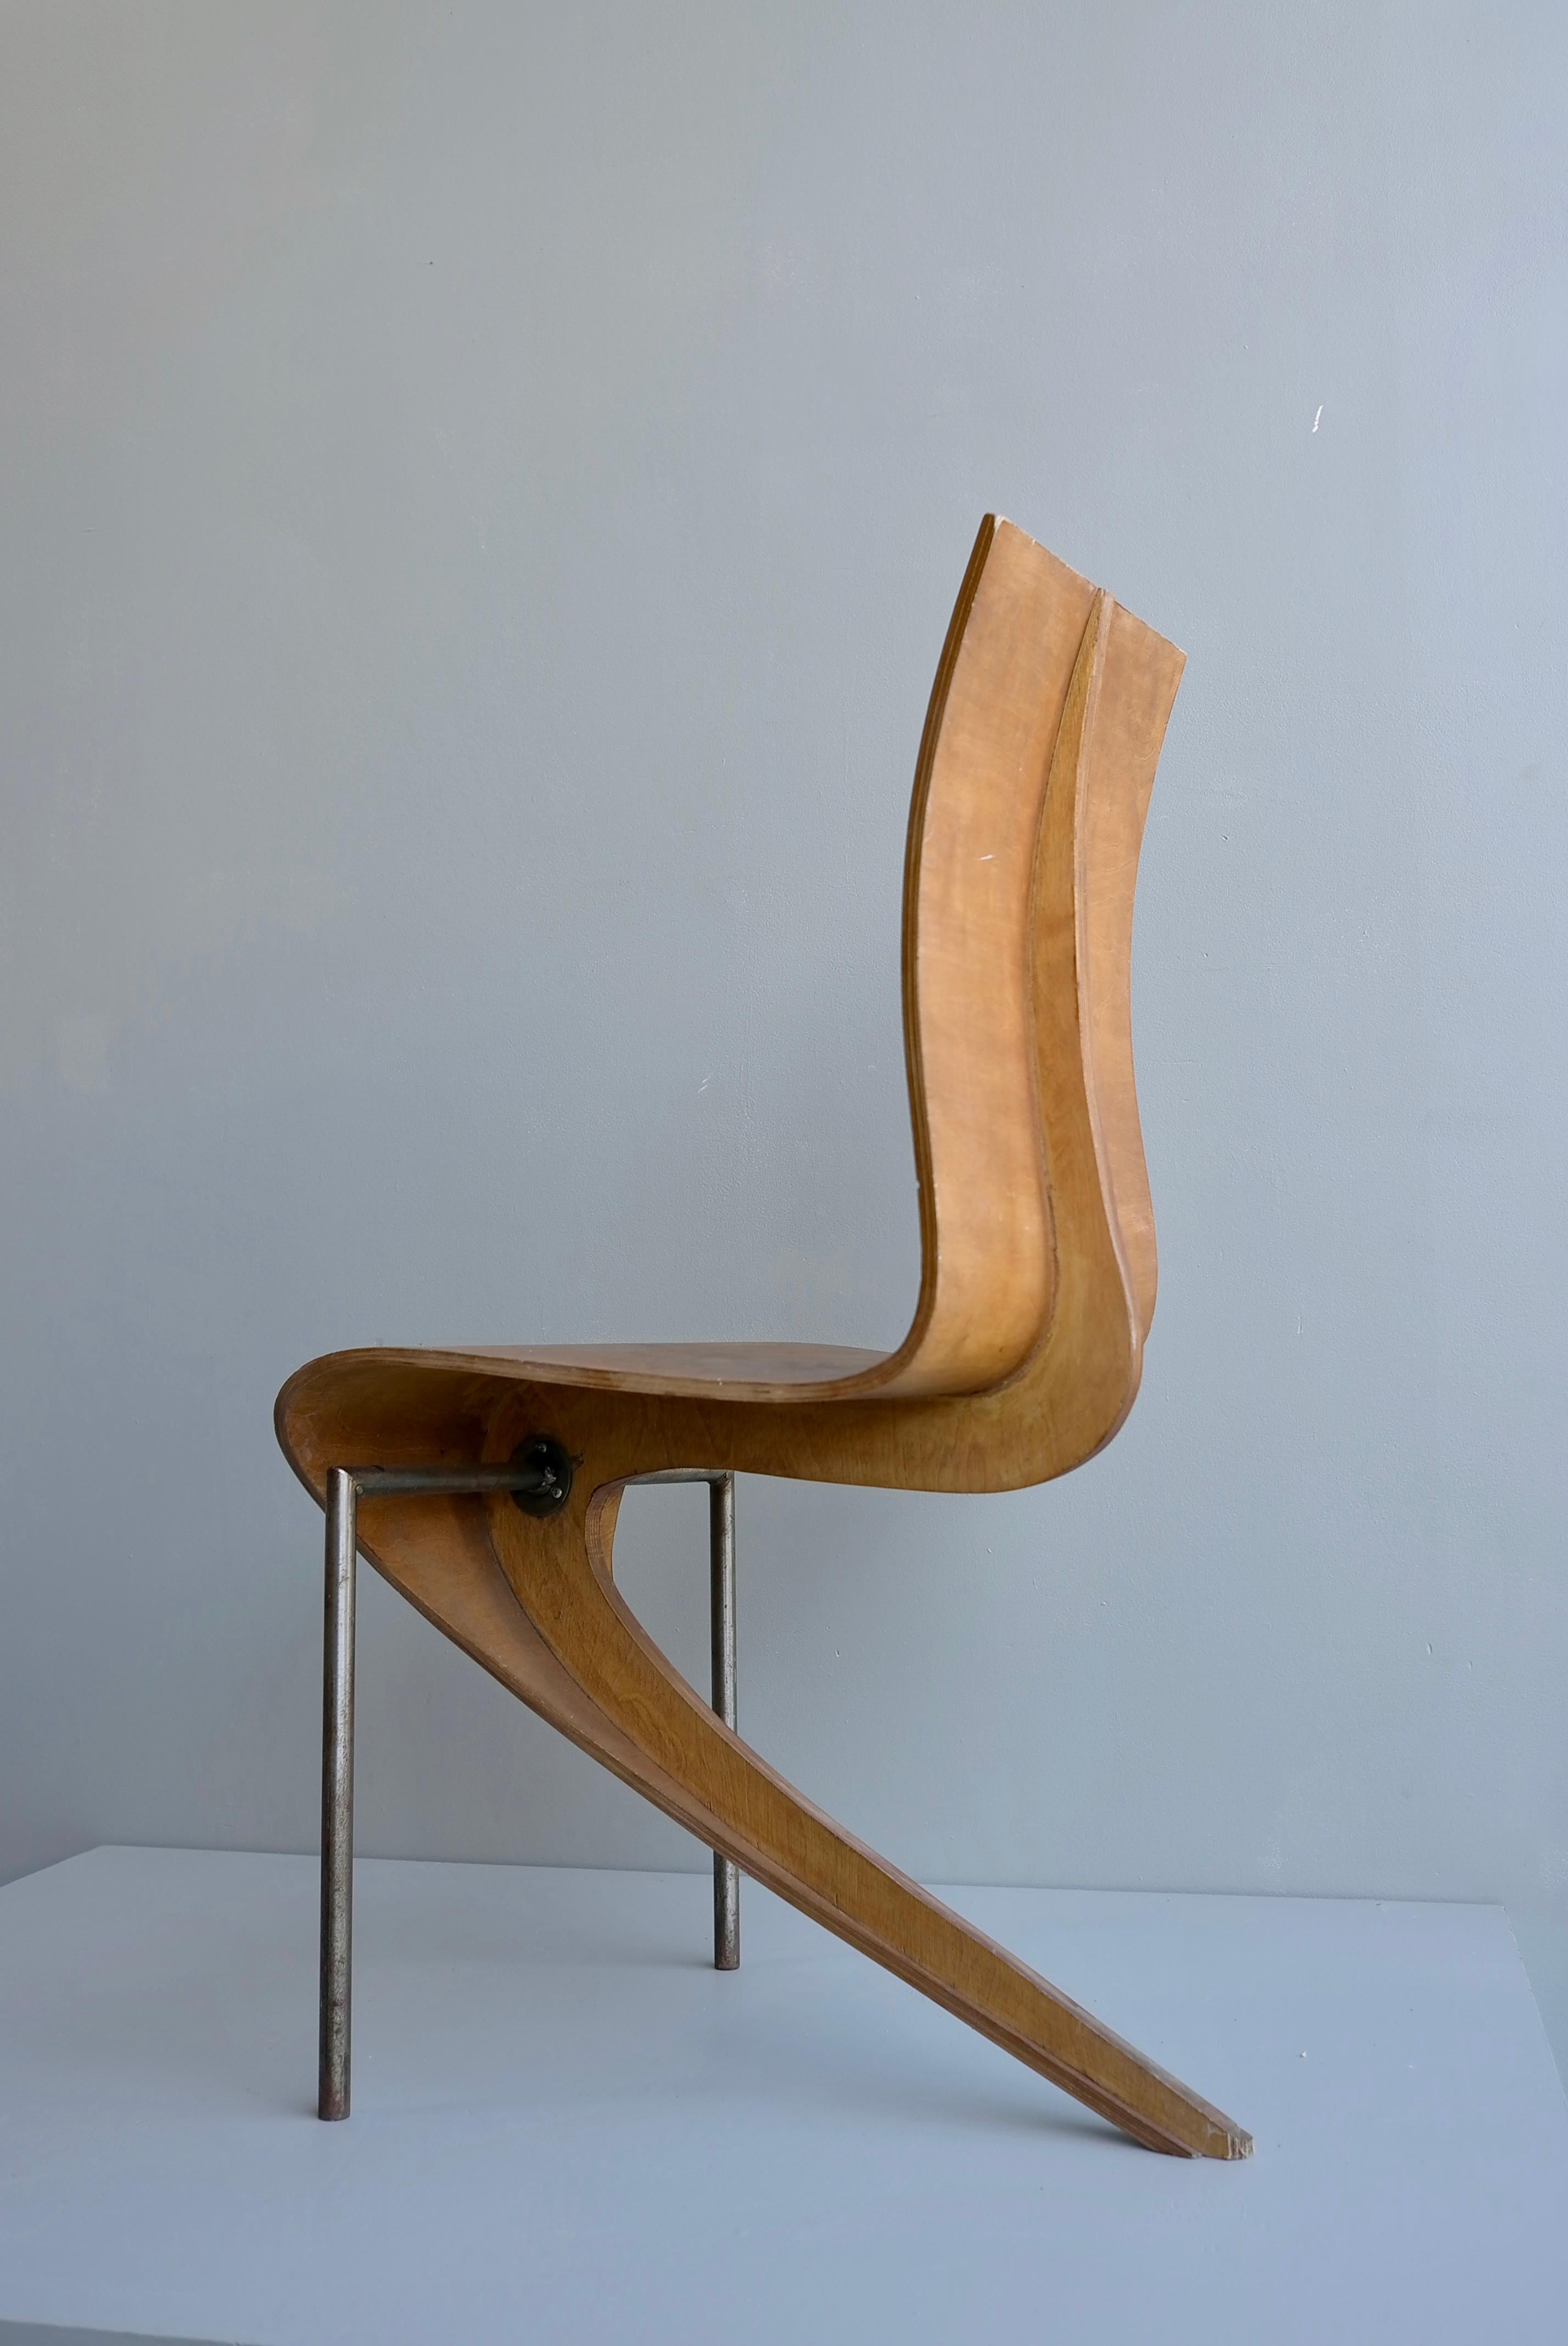 Sculptural Mid-Century Modern French side chair, in style of André Bloc.